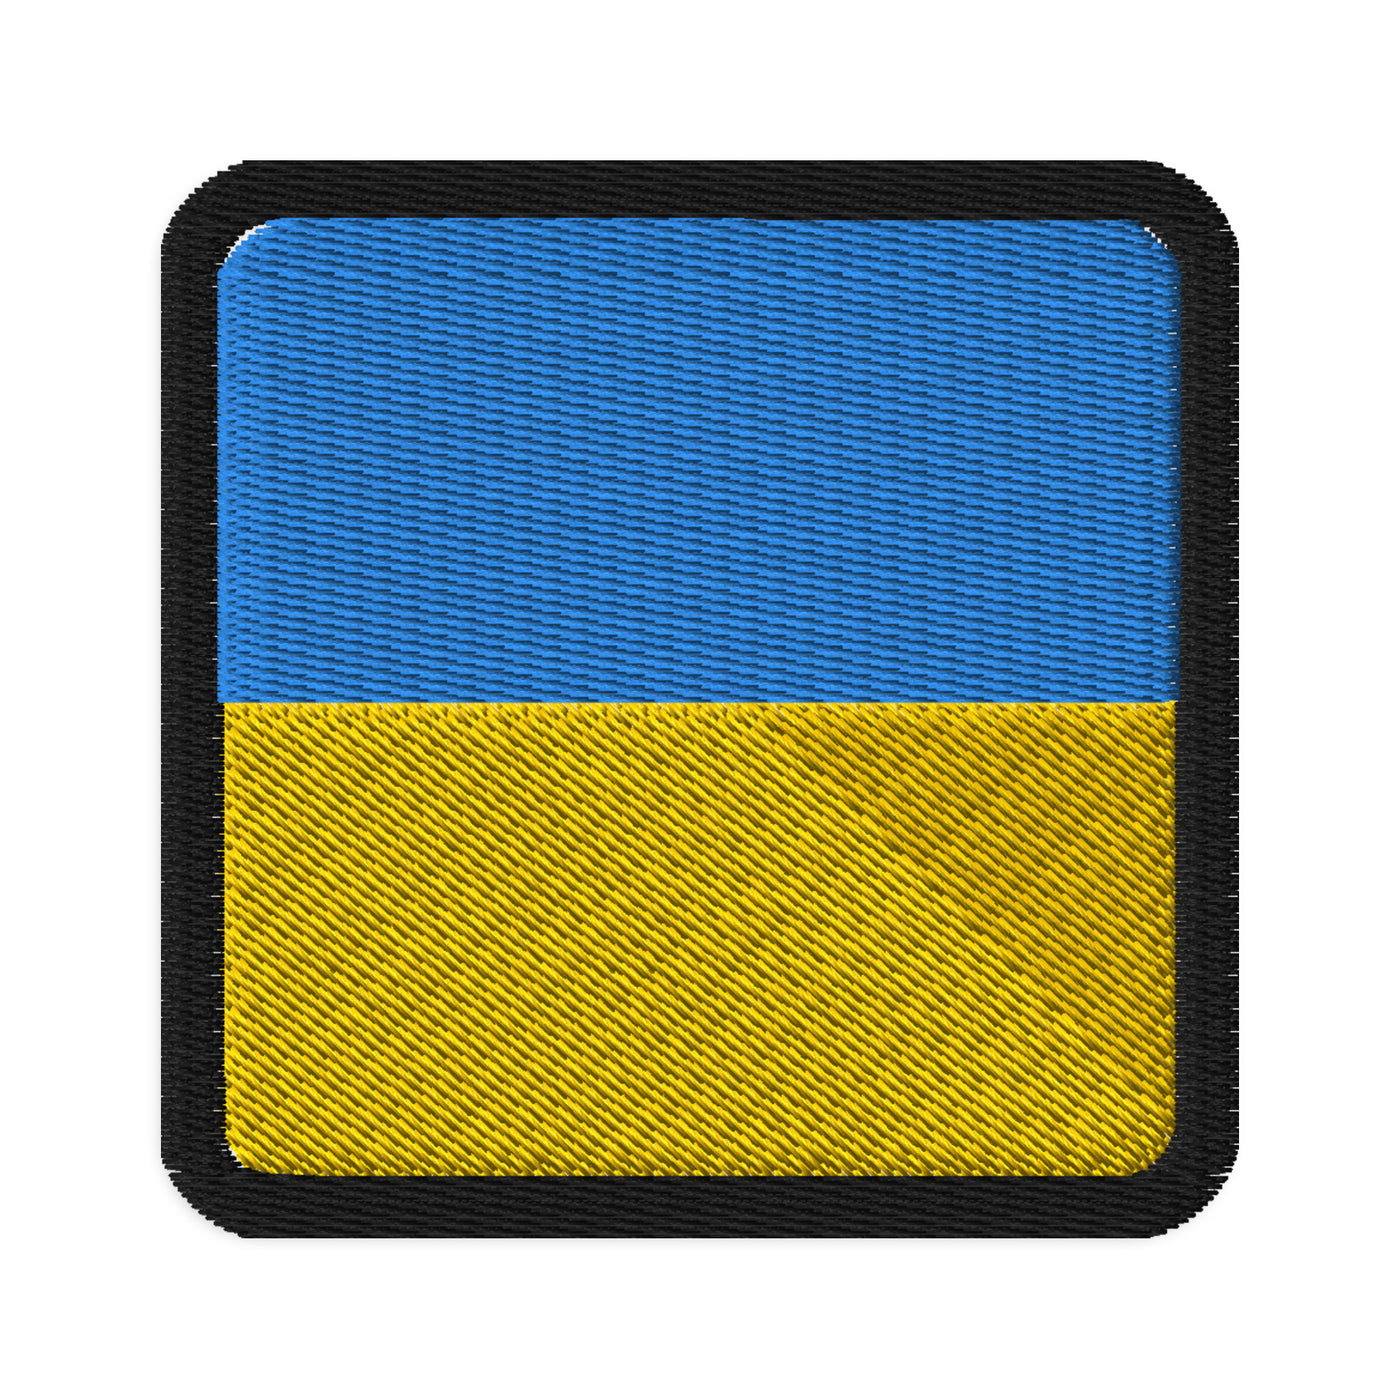 Ukrainian Flag 5 Colored Embroidered Patch